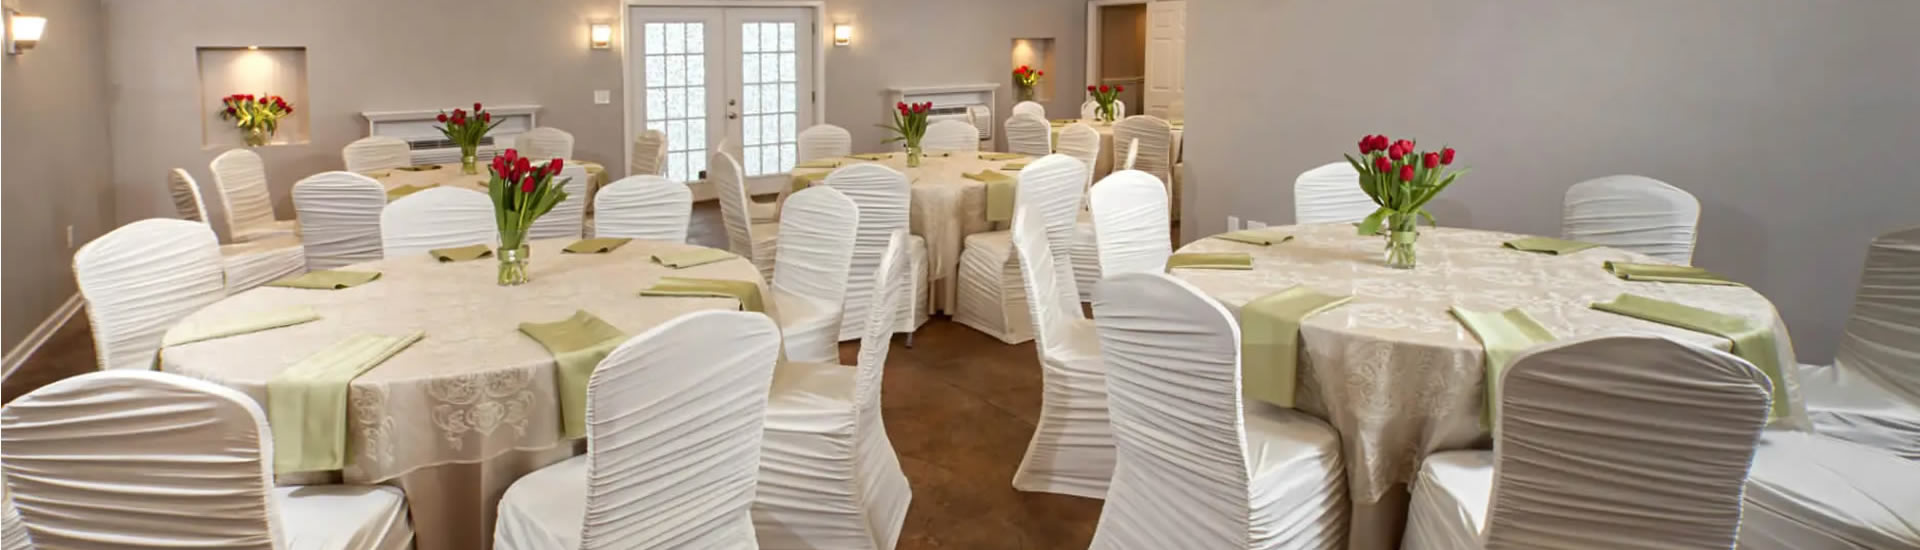 Large meeting room dressed for a wedding with several round tables with green and beige table linens and red tulips